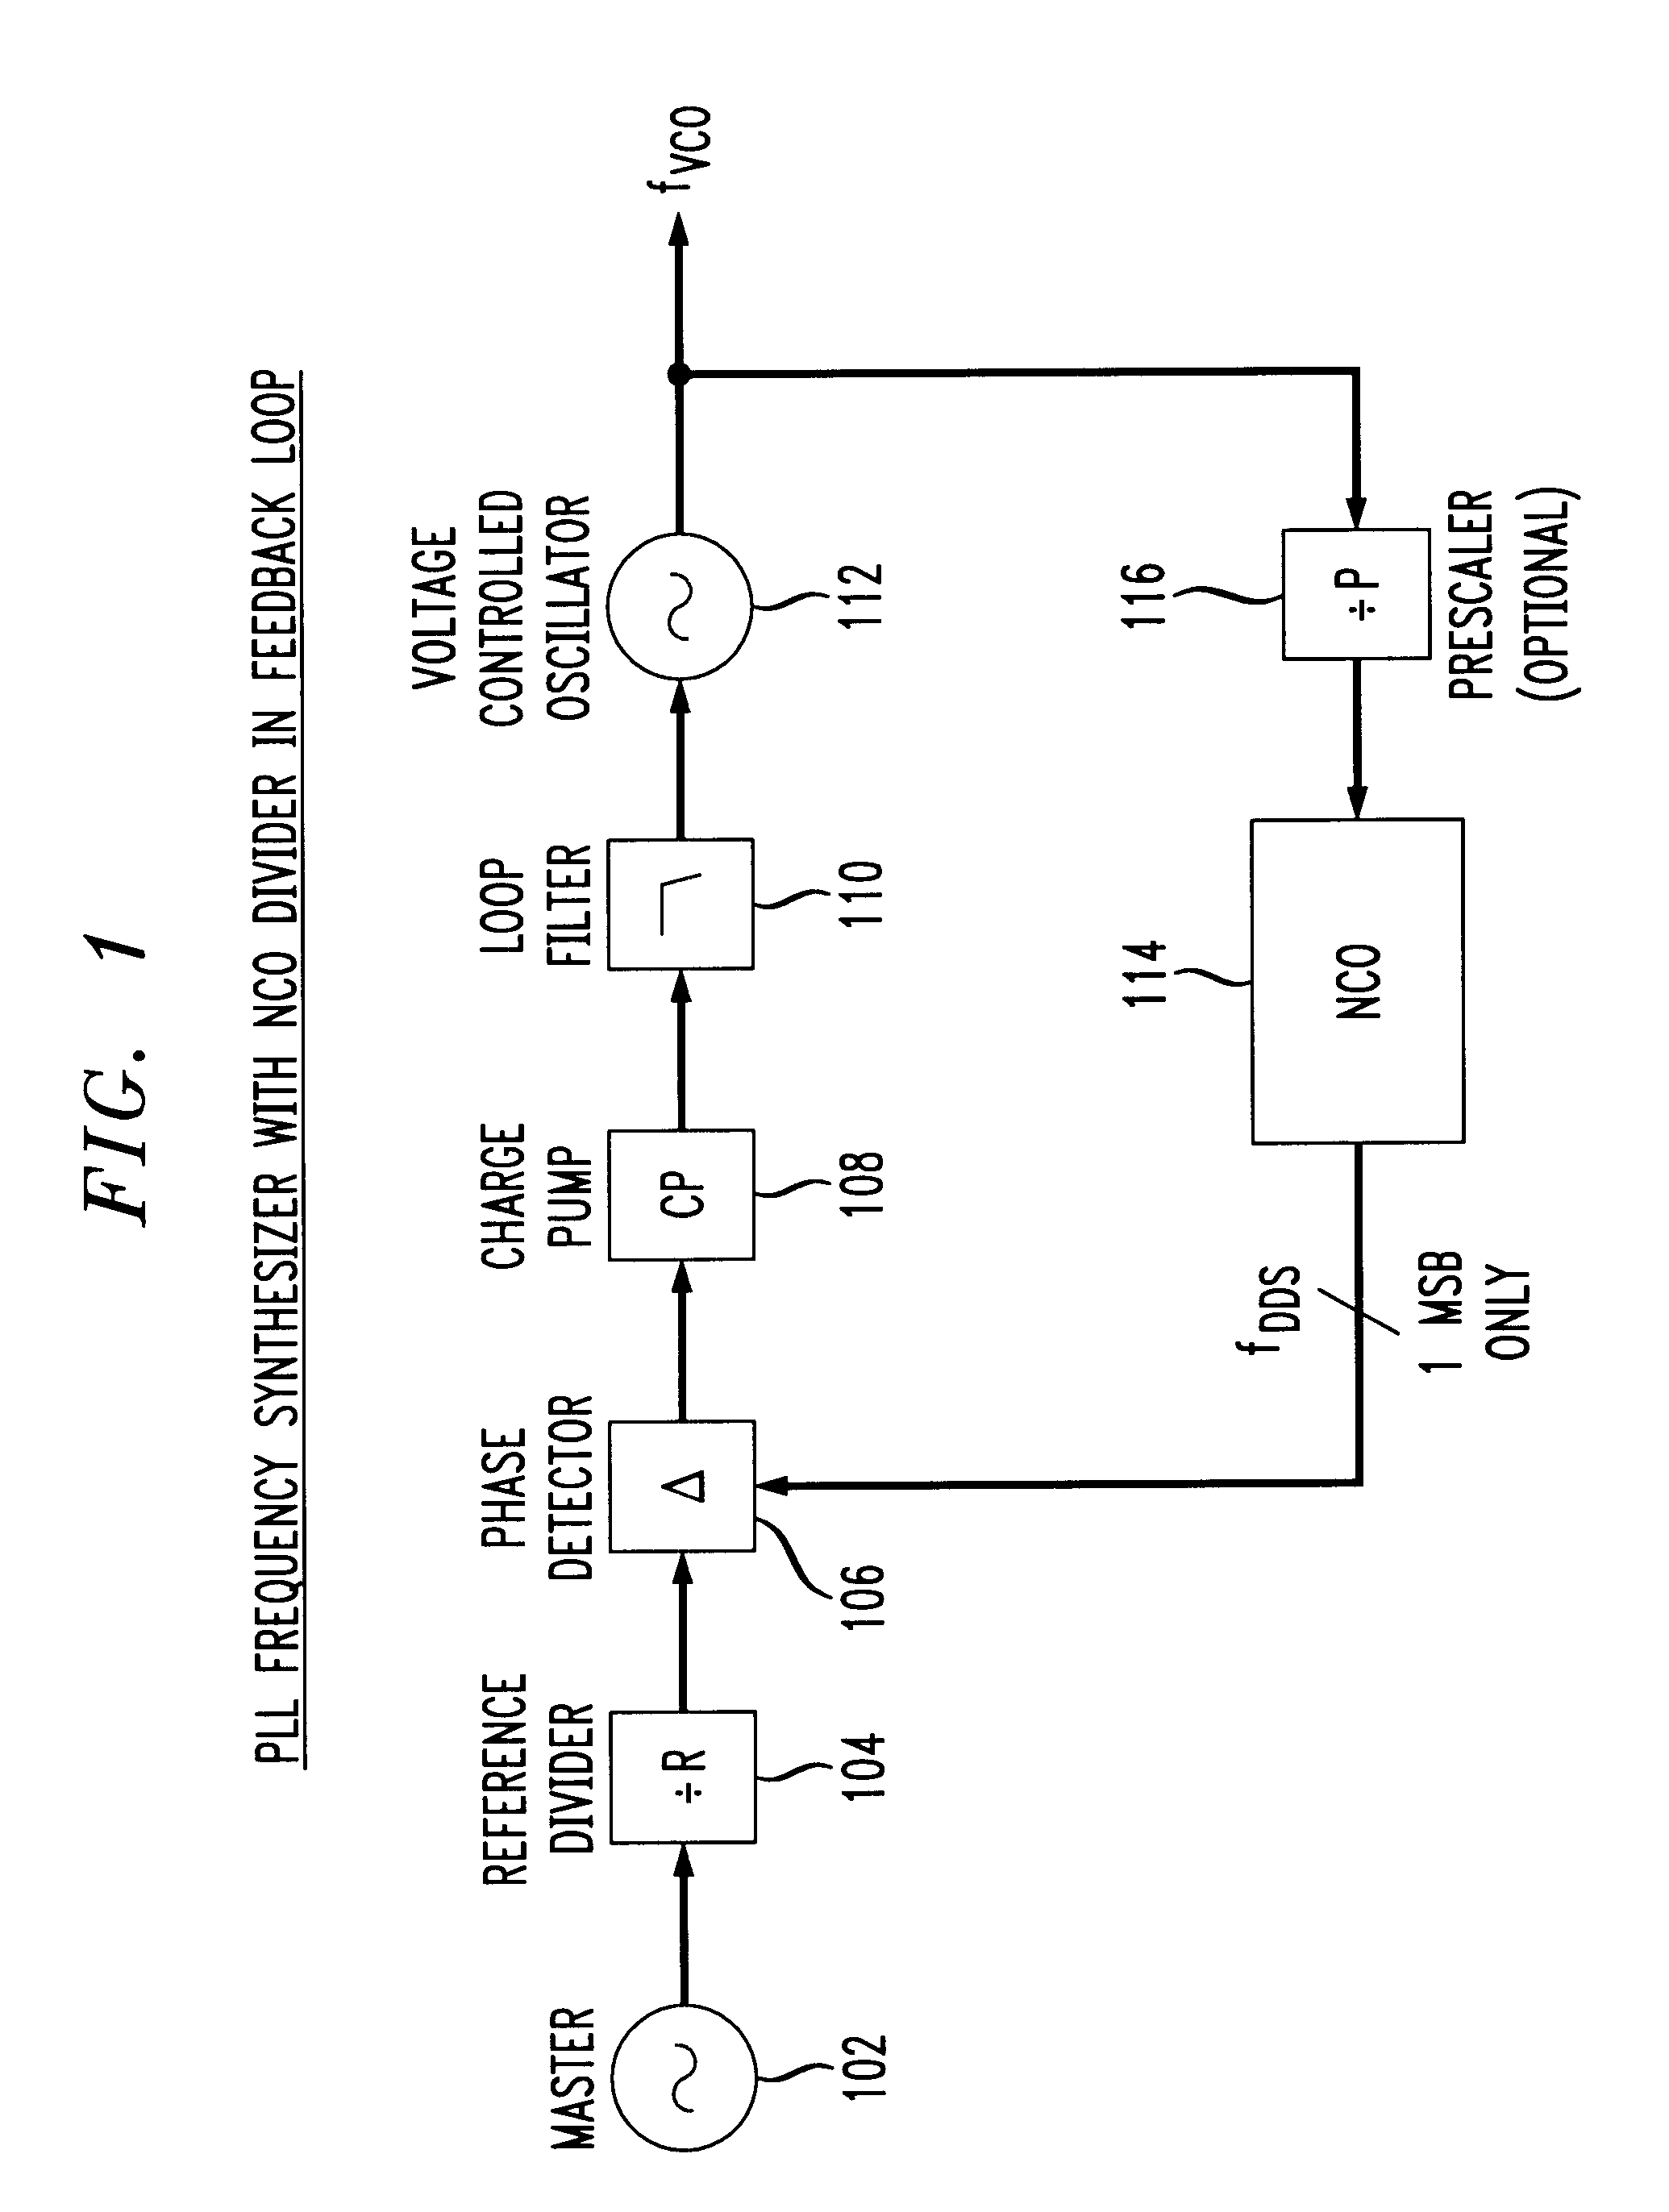 Phase locked loop with numerically controlled oscillator divider in feedback loop